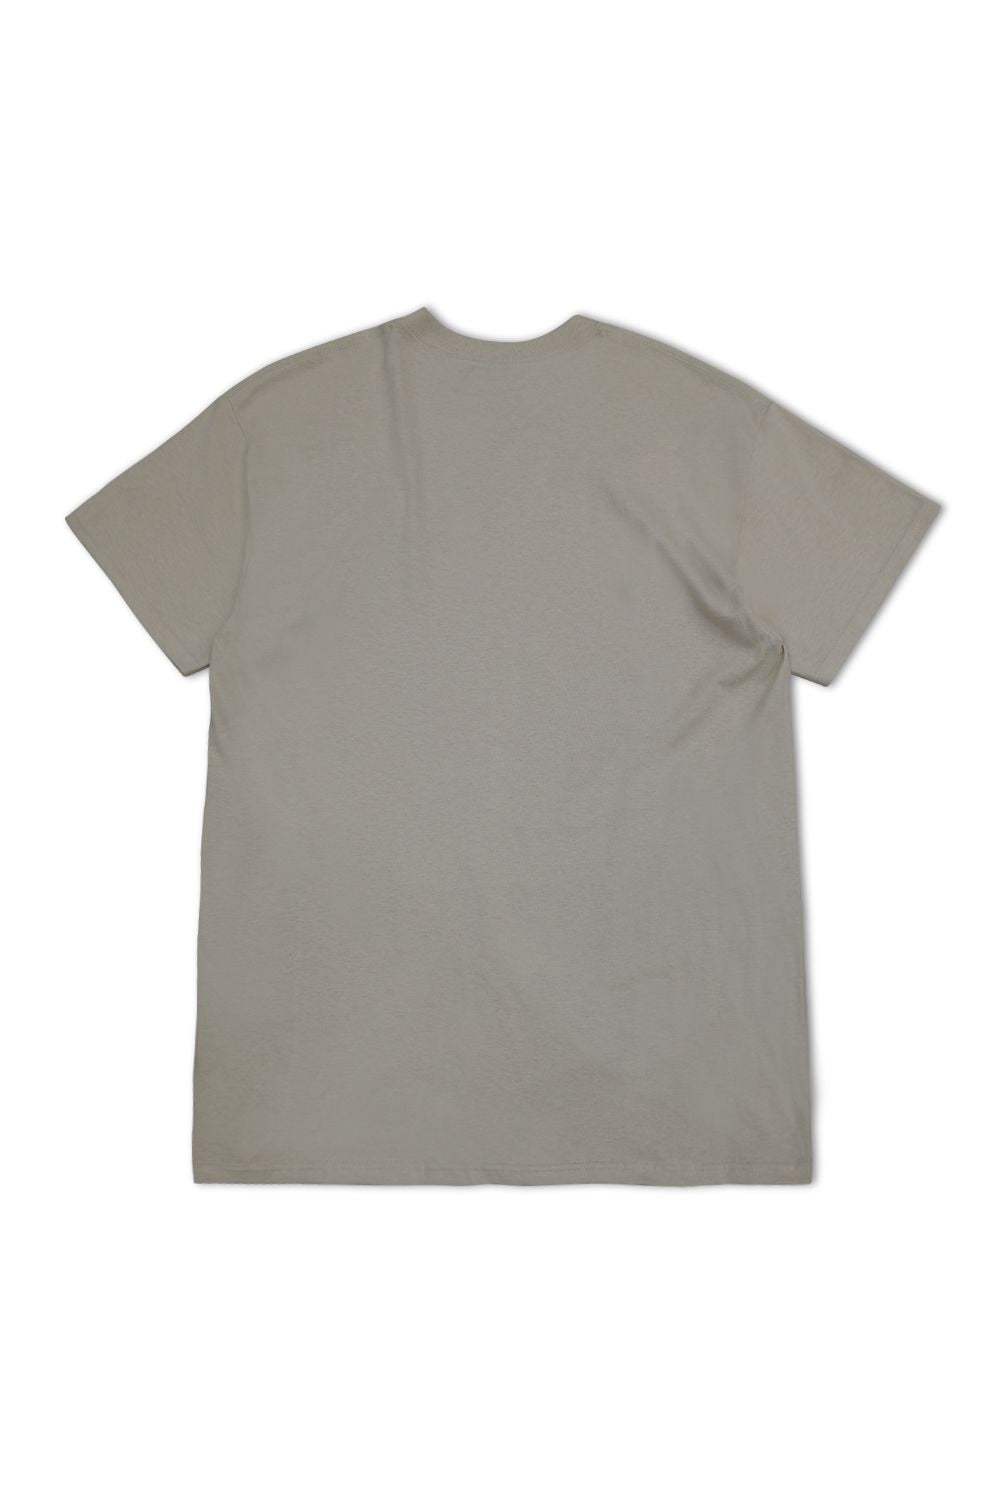 Highs Lows Graphic T - Shirt - Cream